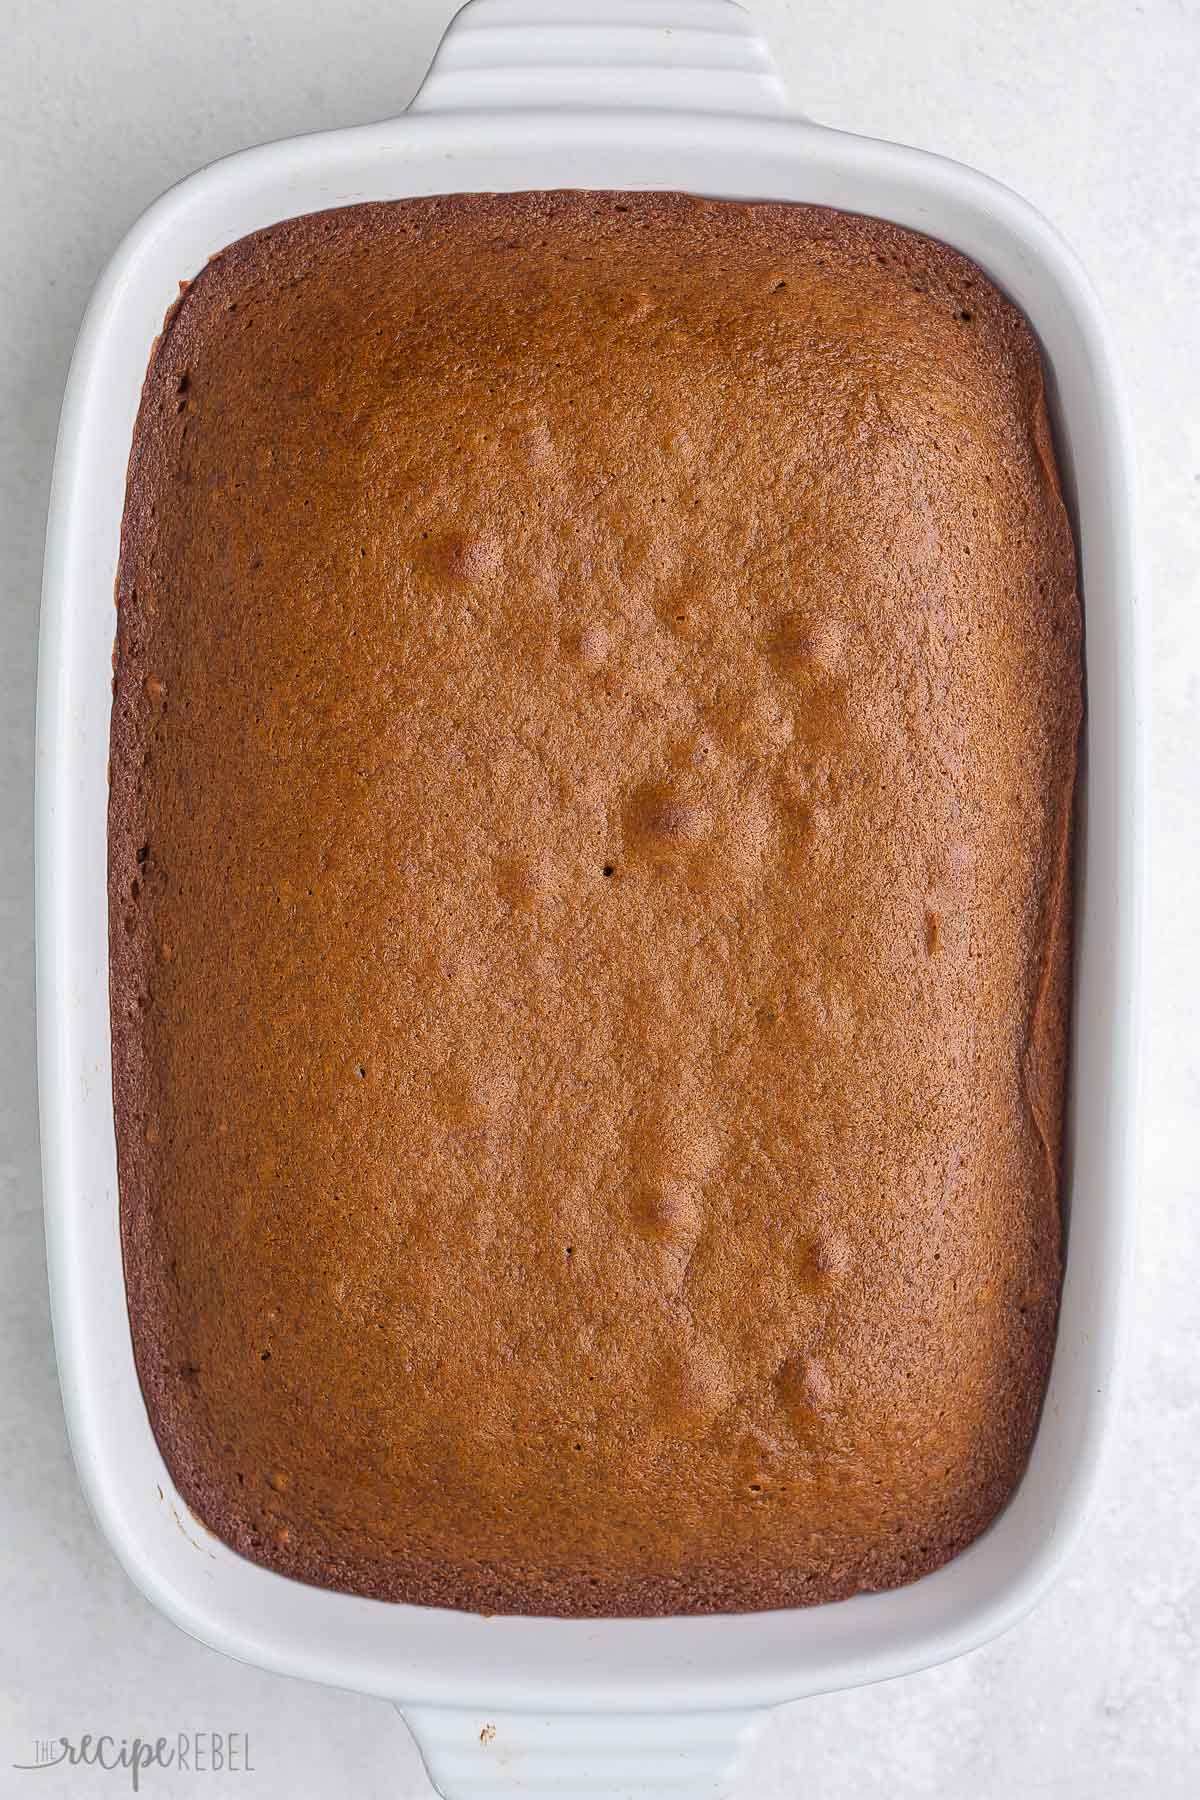 pan of baked gingerbread.